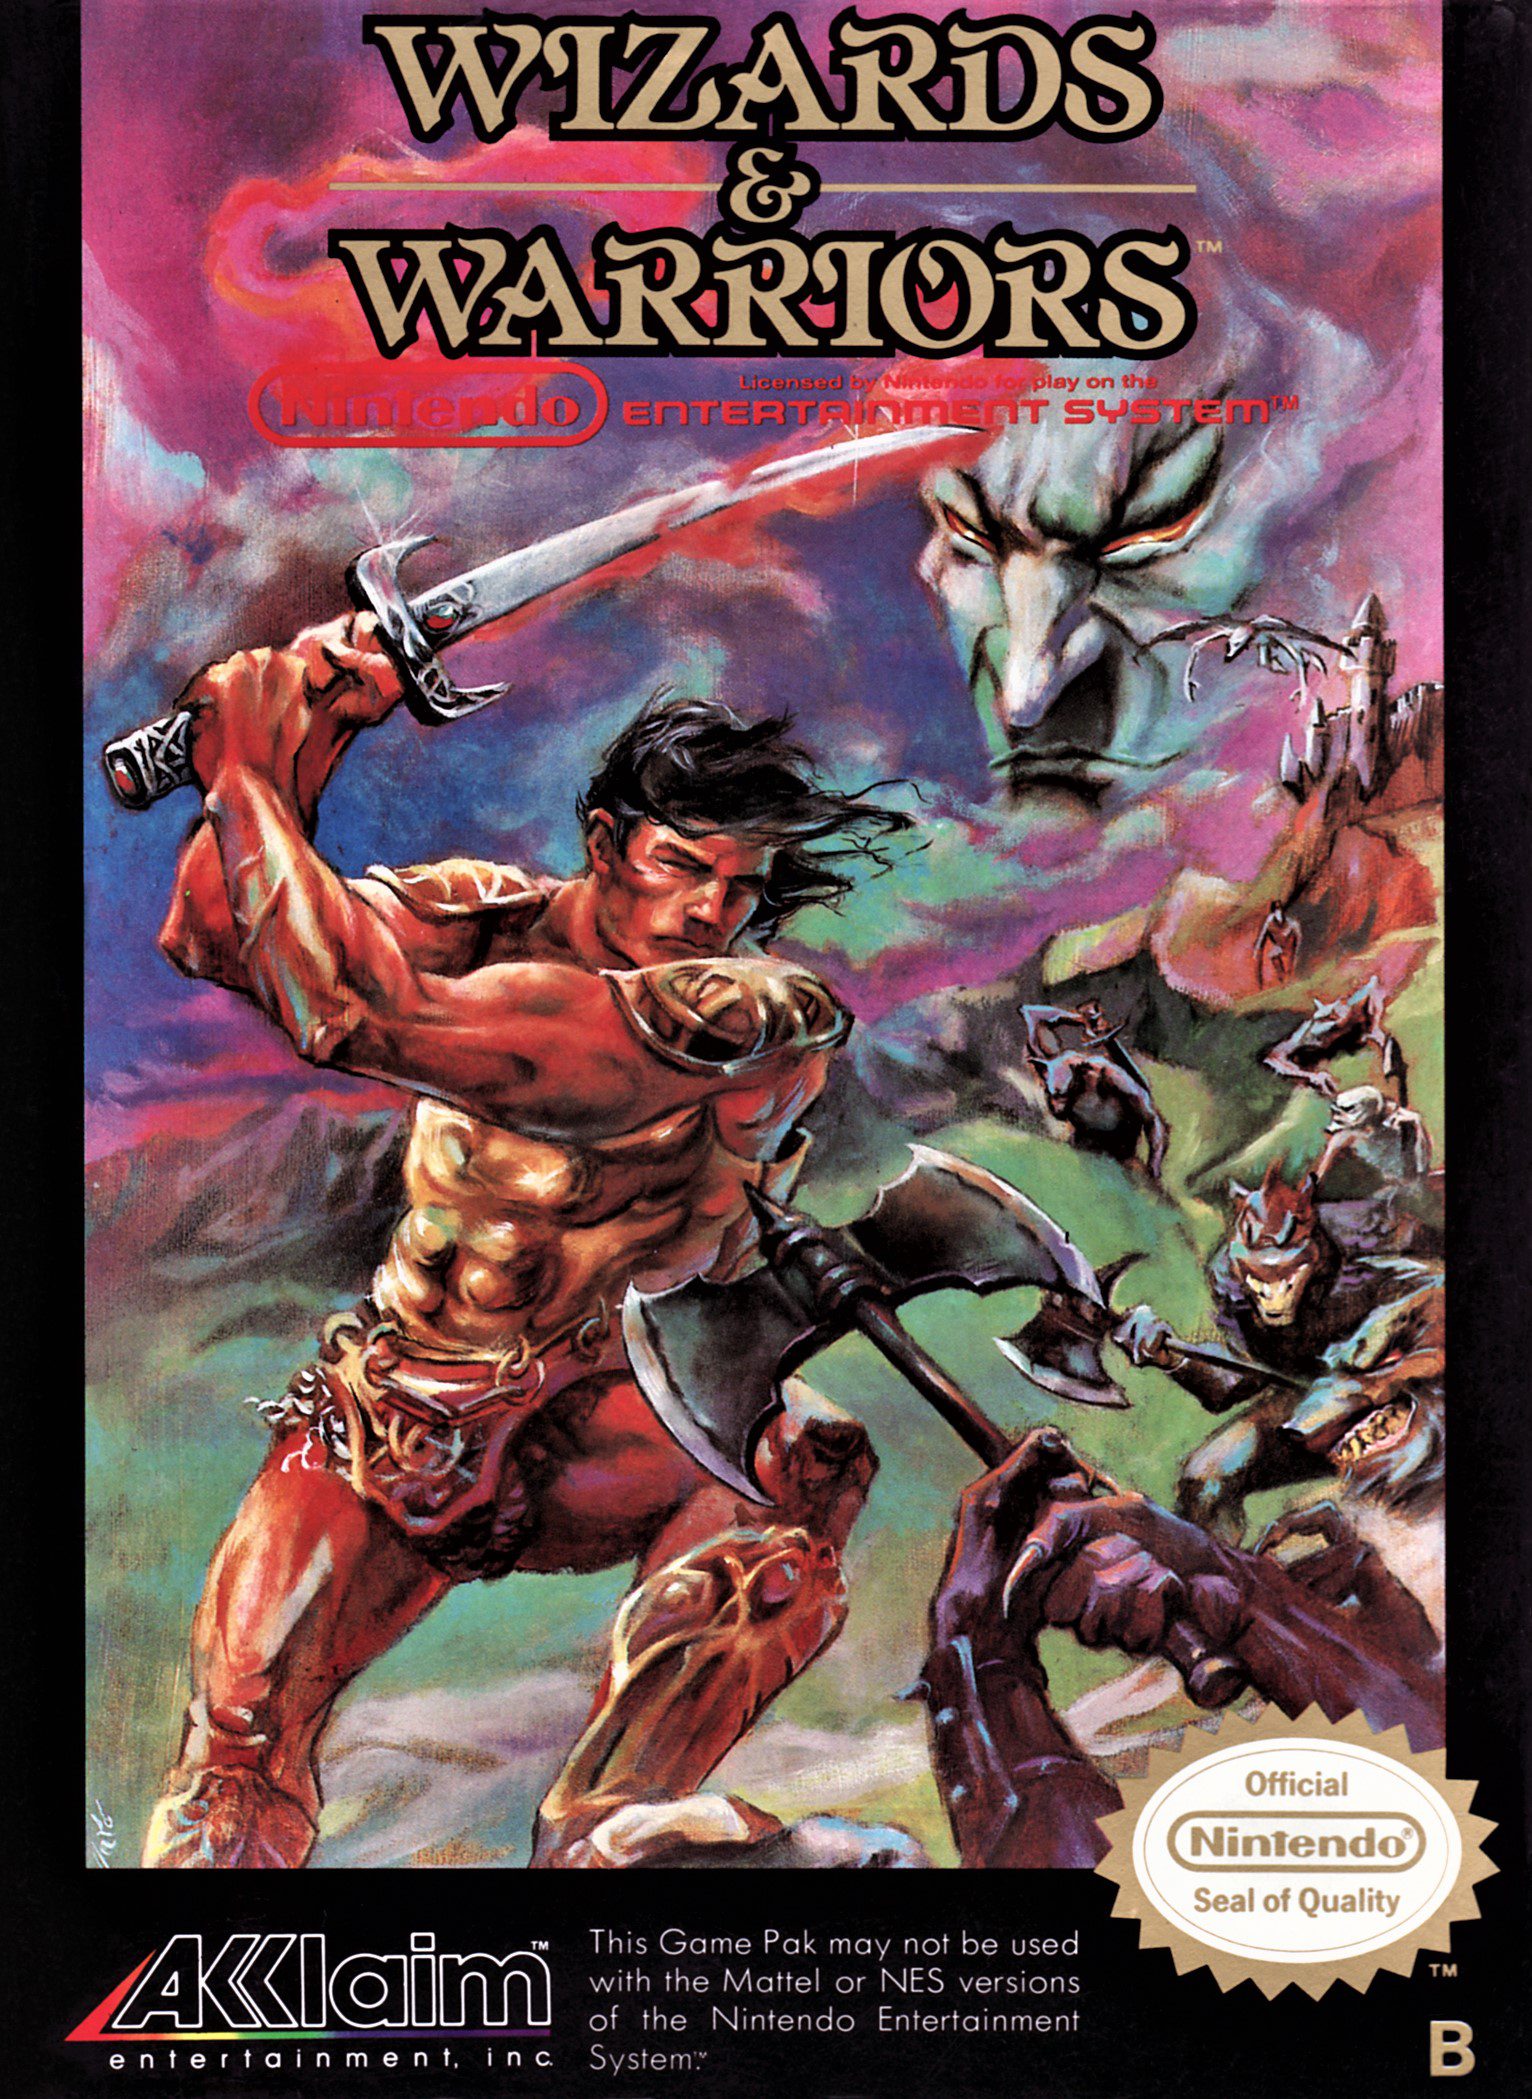 Wizards & Warriors for Nintendo Entertainment System (NES)